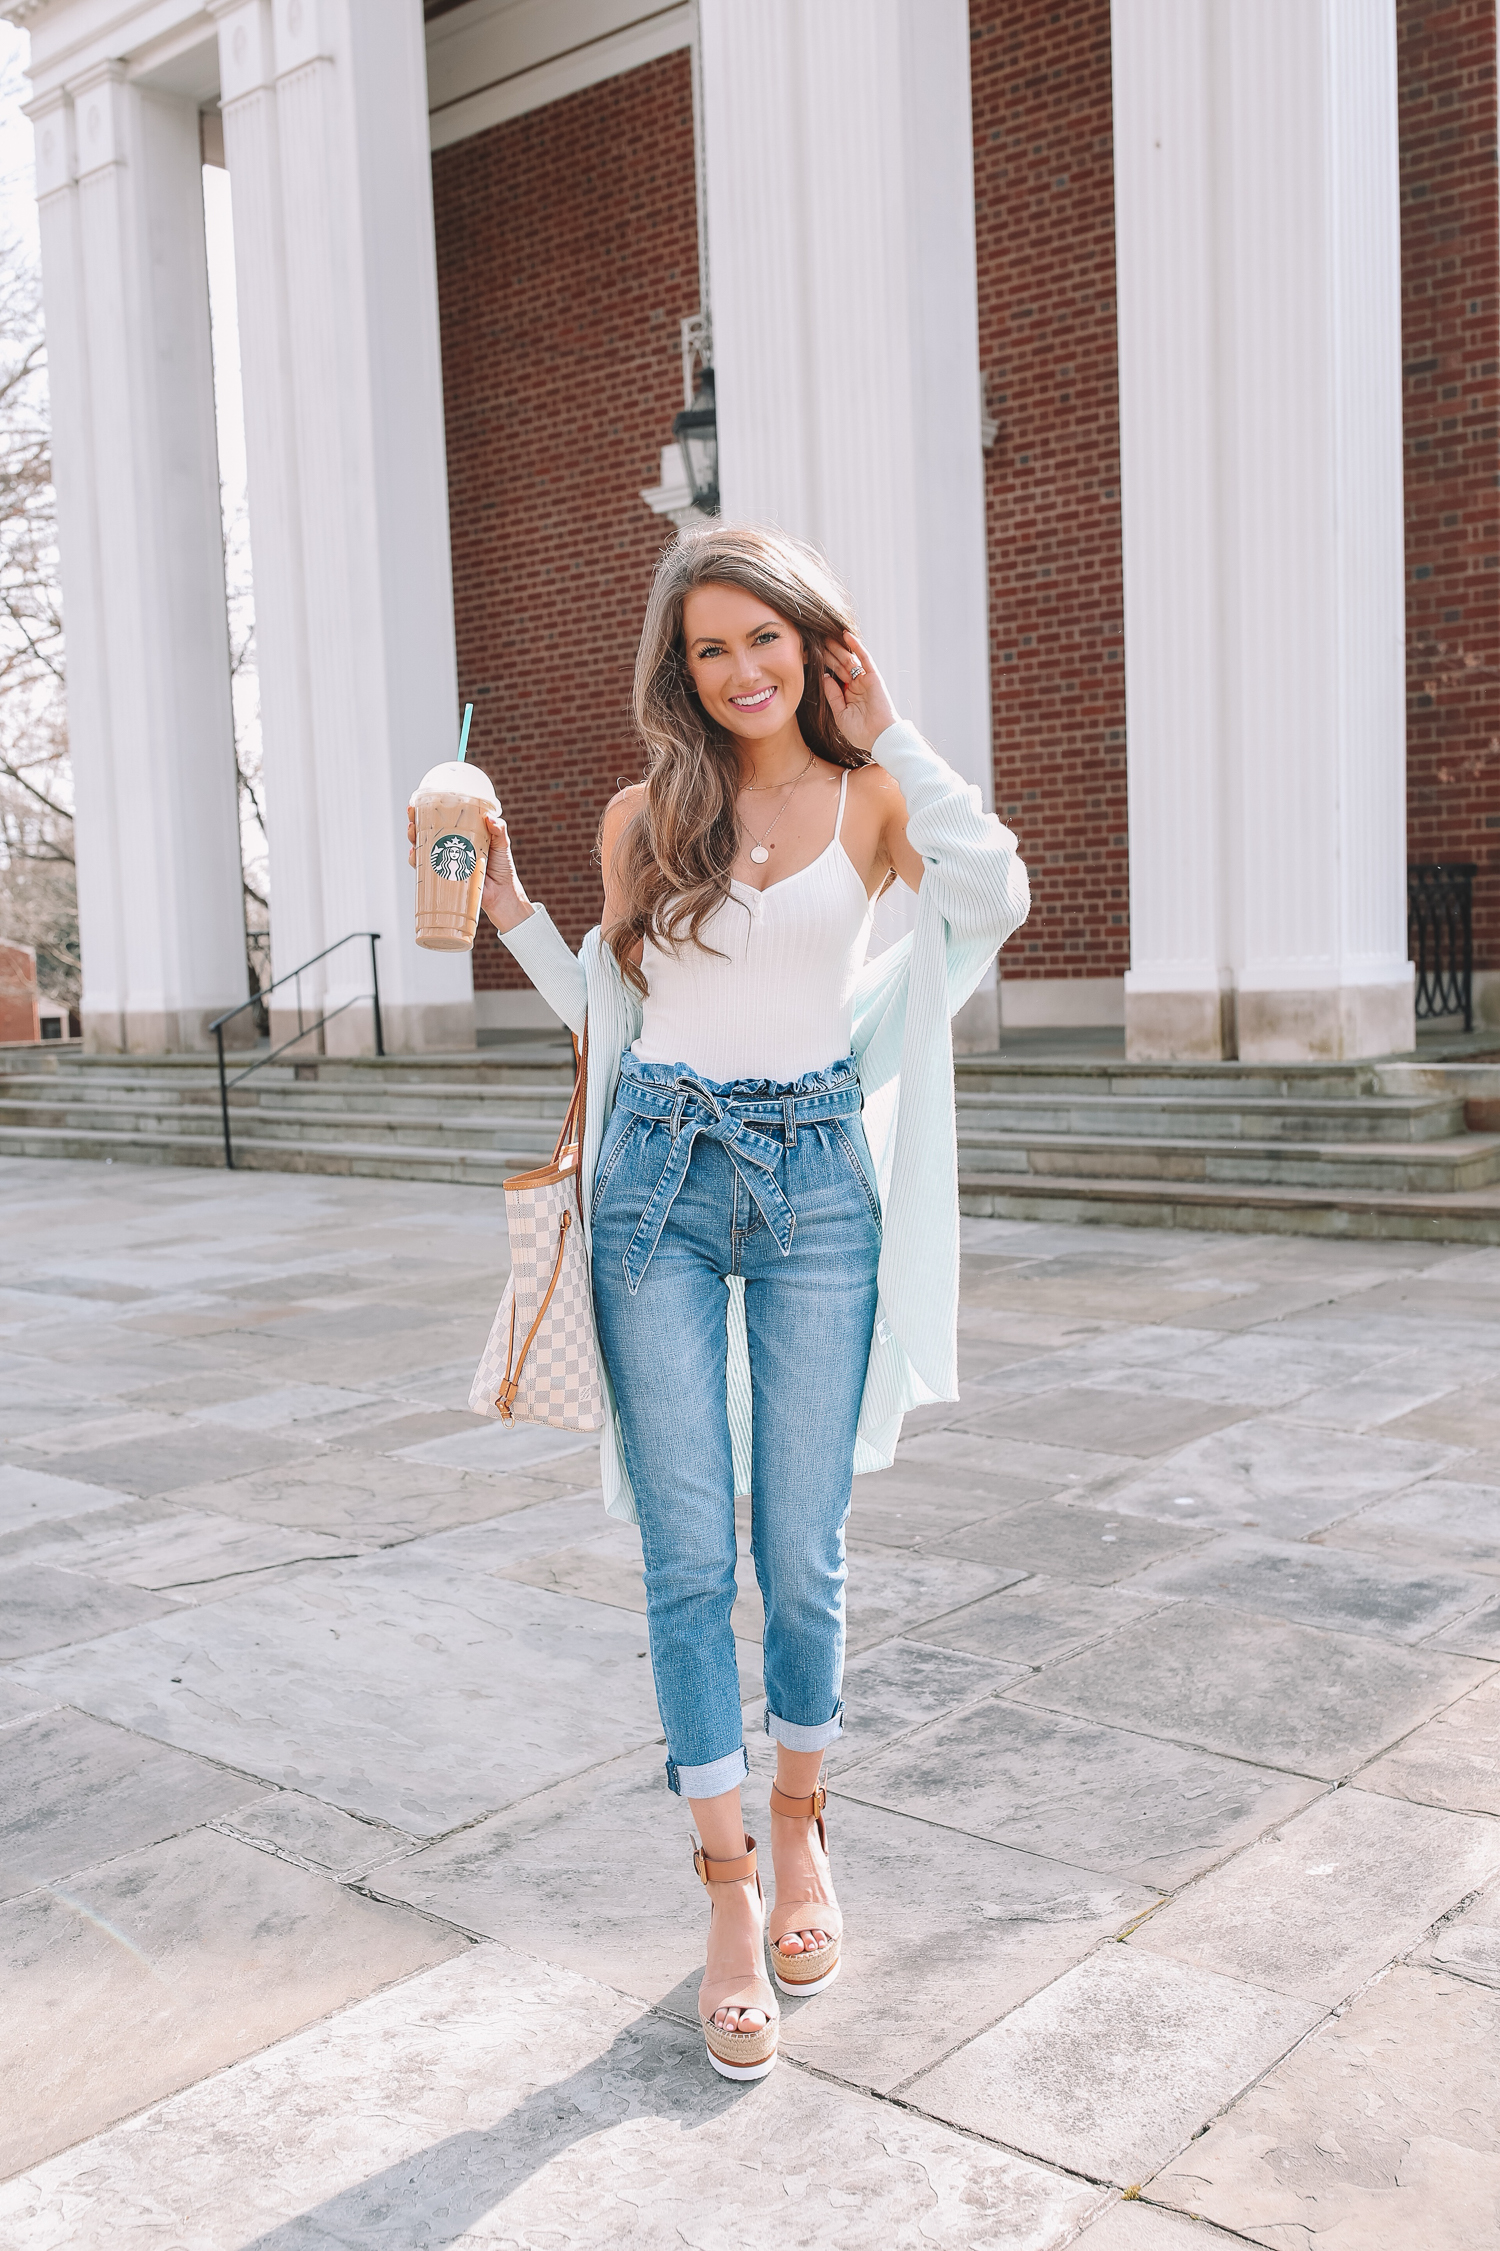 Where to Buy Designer Handbags for Less - Southern Curls & Pearls